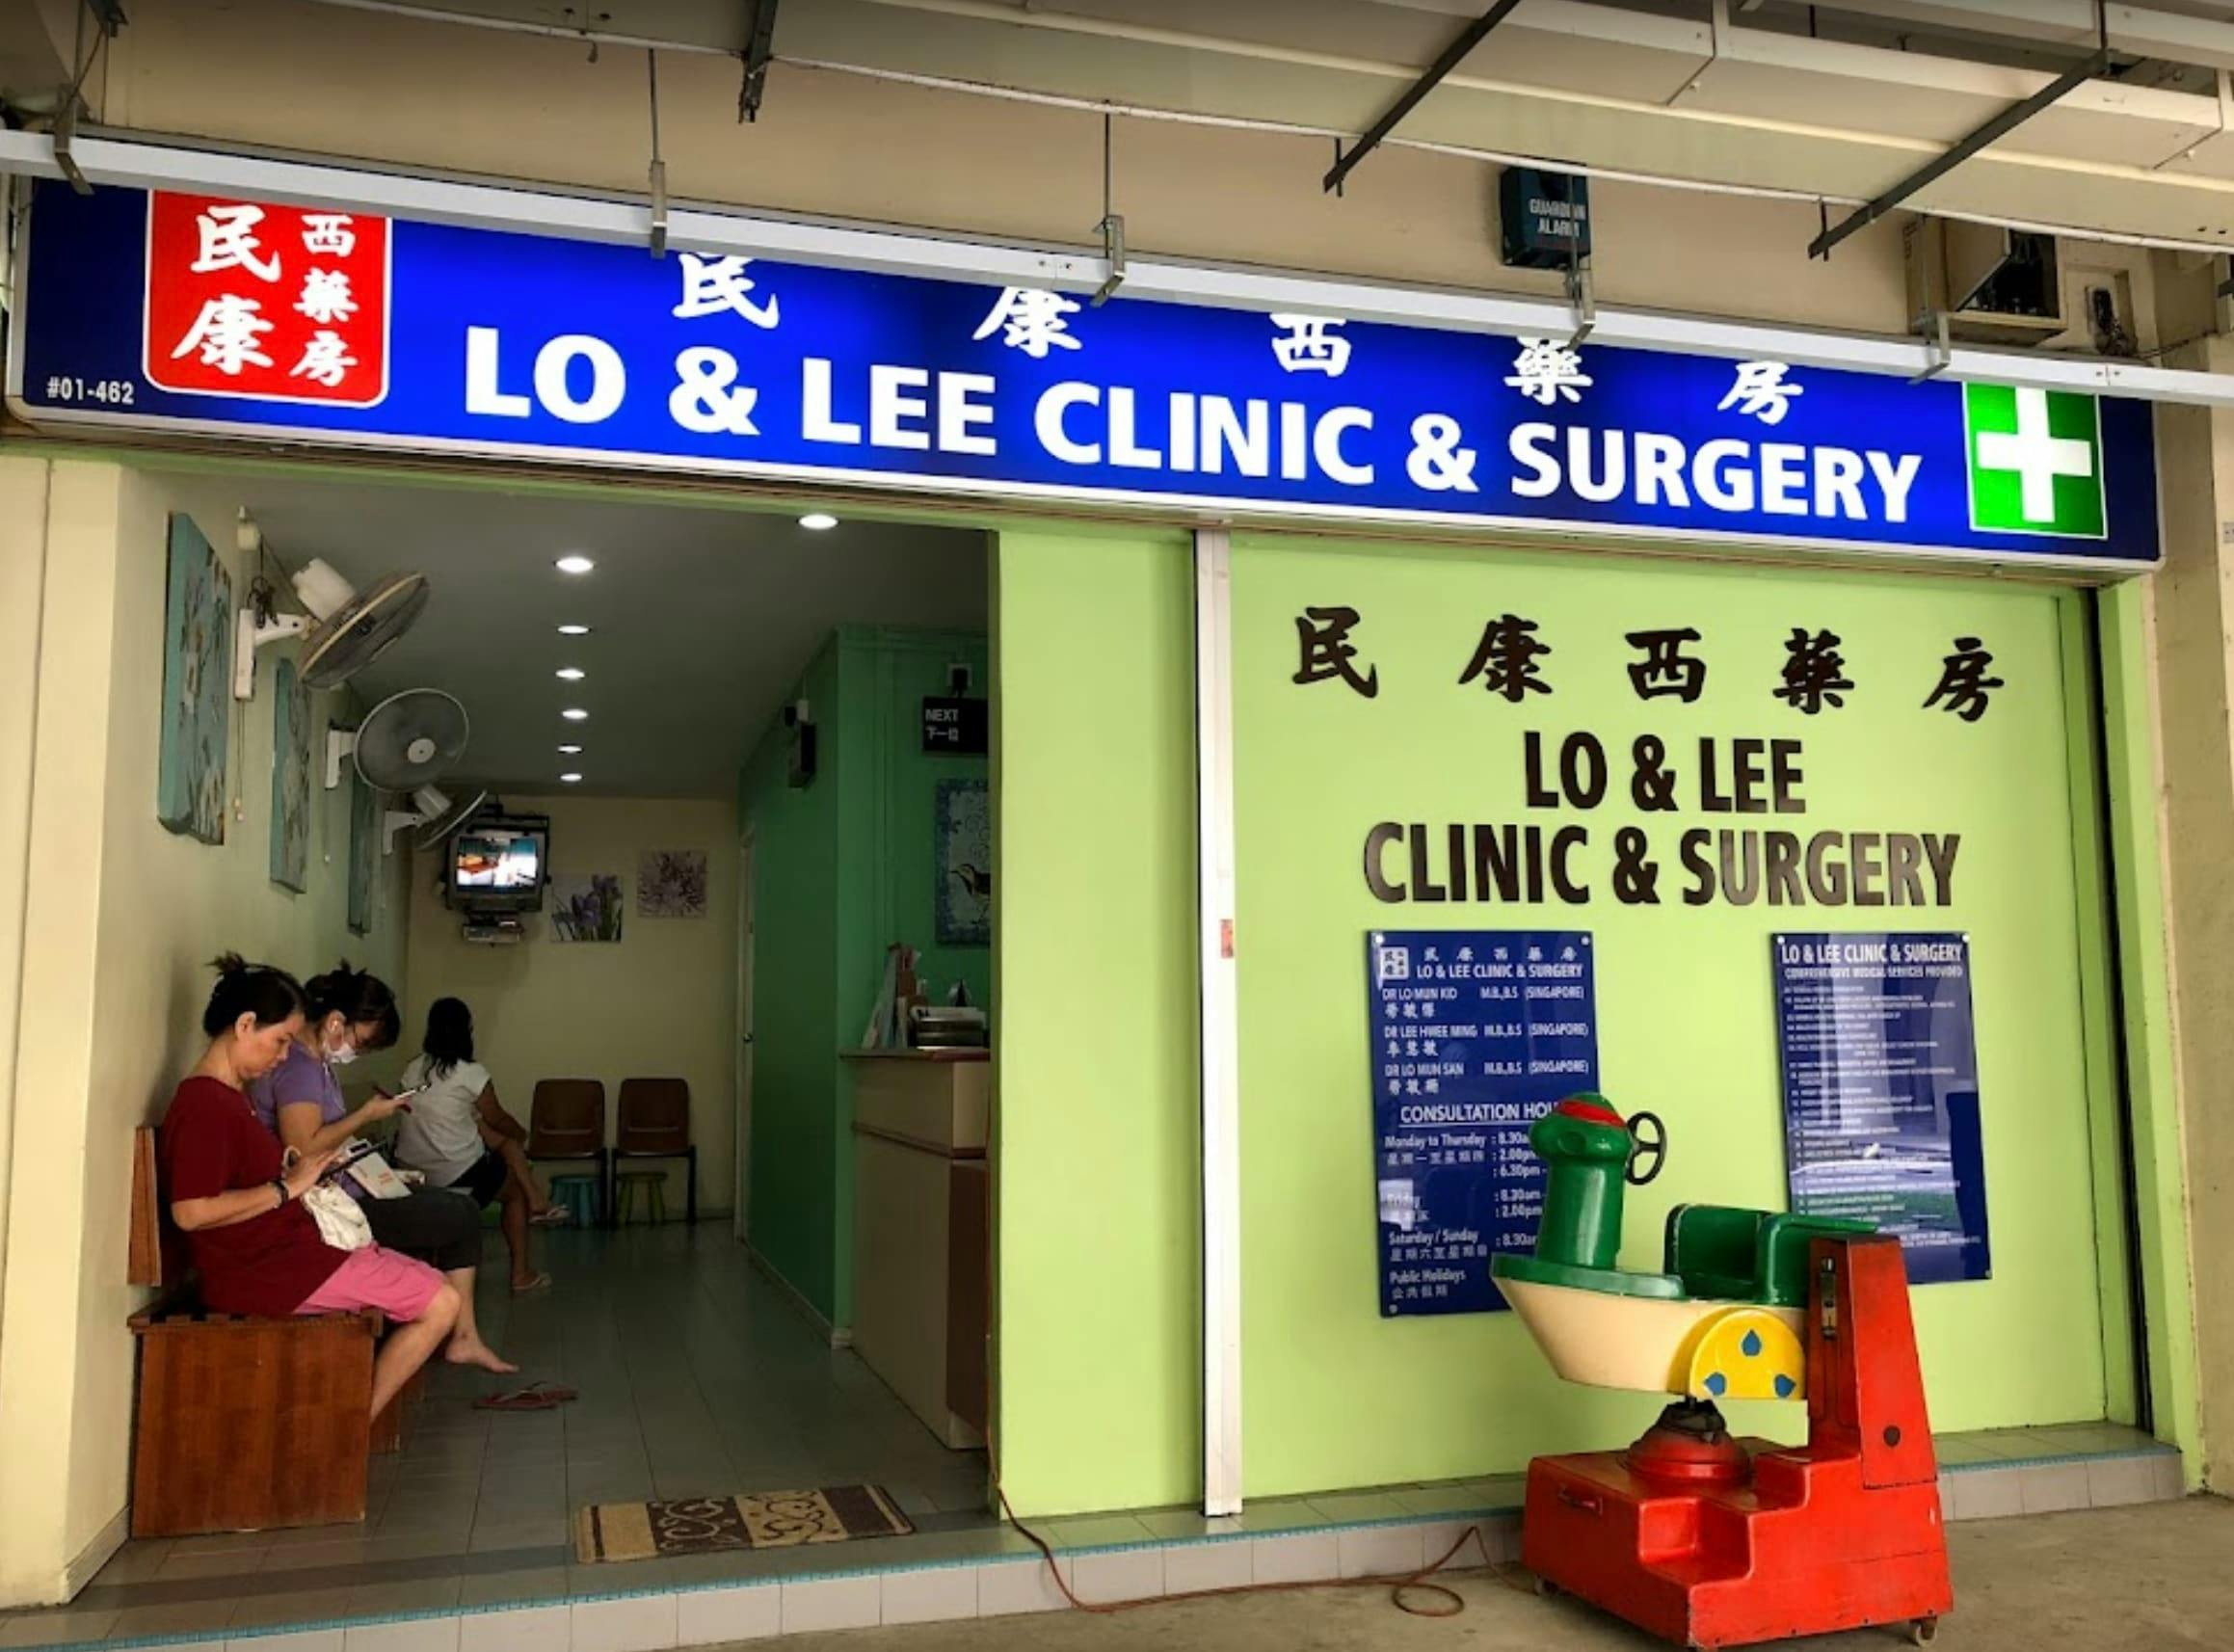 Lo & Lee Clinic & Surgery